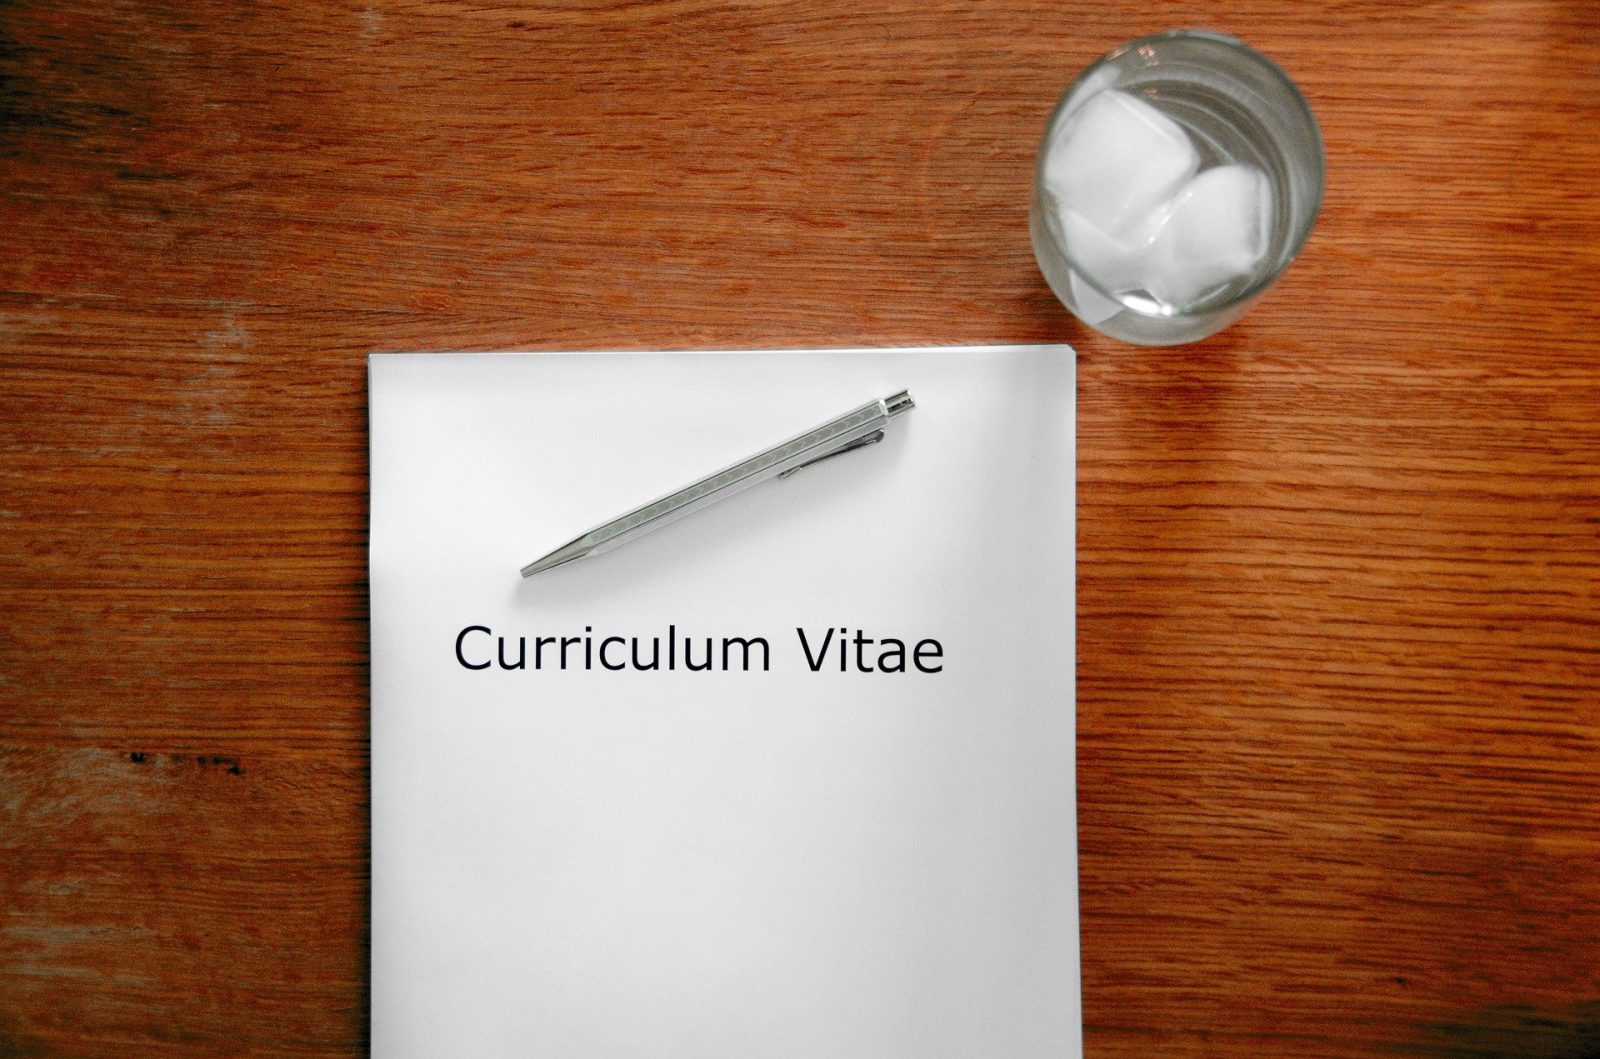 A photo of a CV and a glass of water: Image by Tobias Herrmann from Pixabay